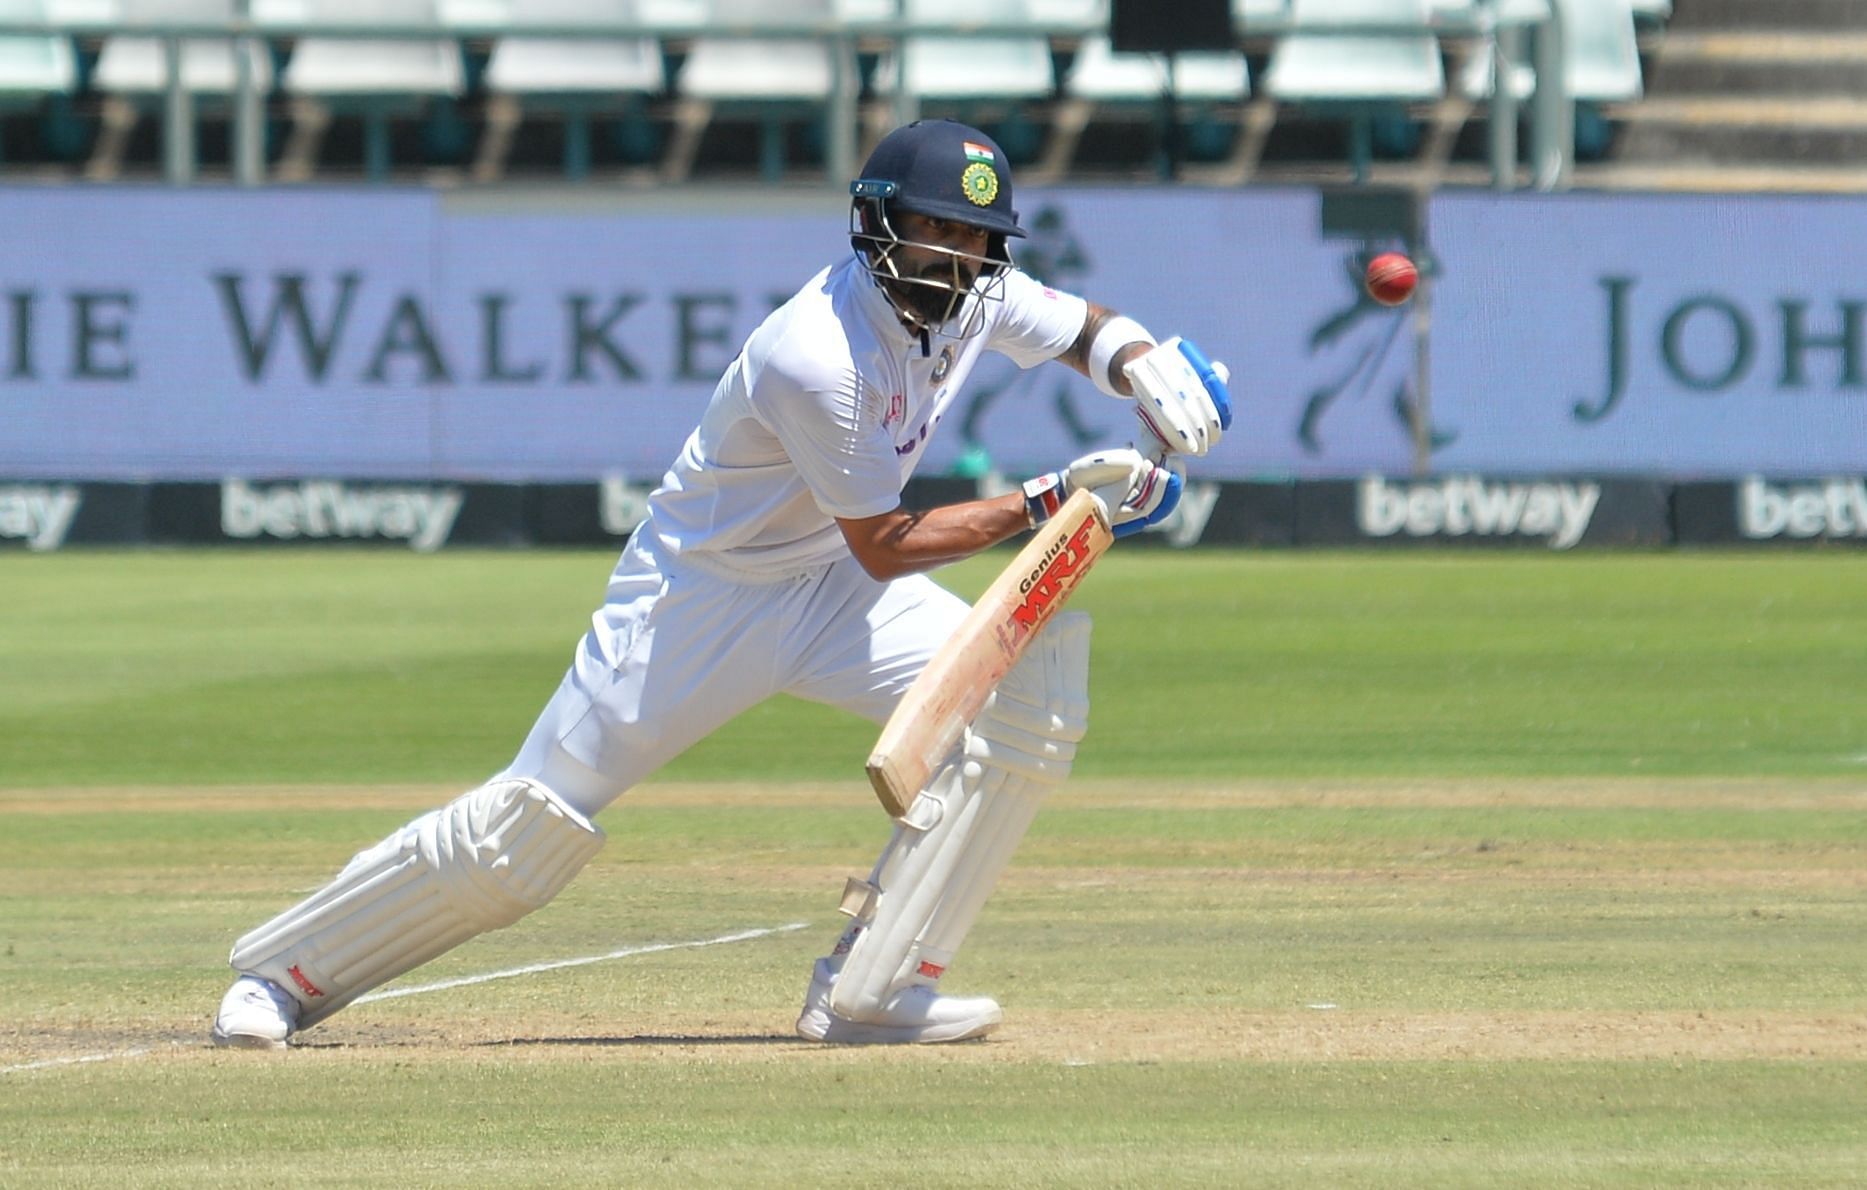 South Africa v India - 3rd Test - Day 3